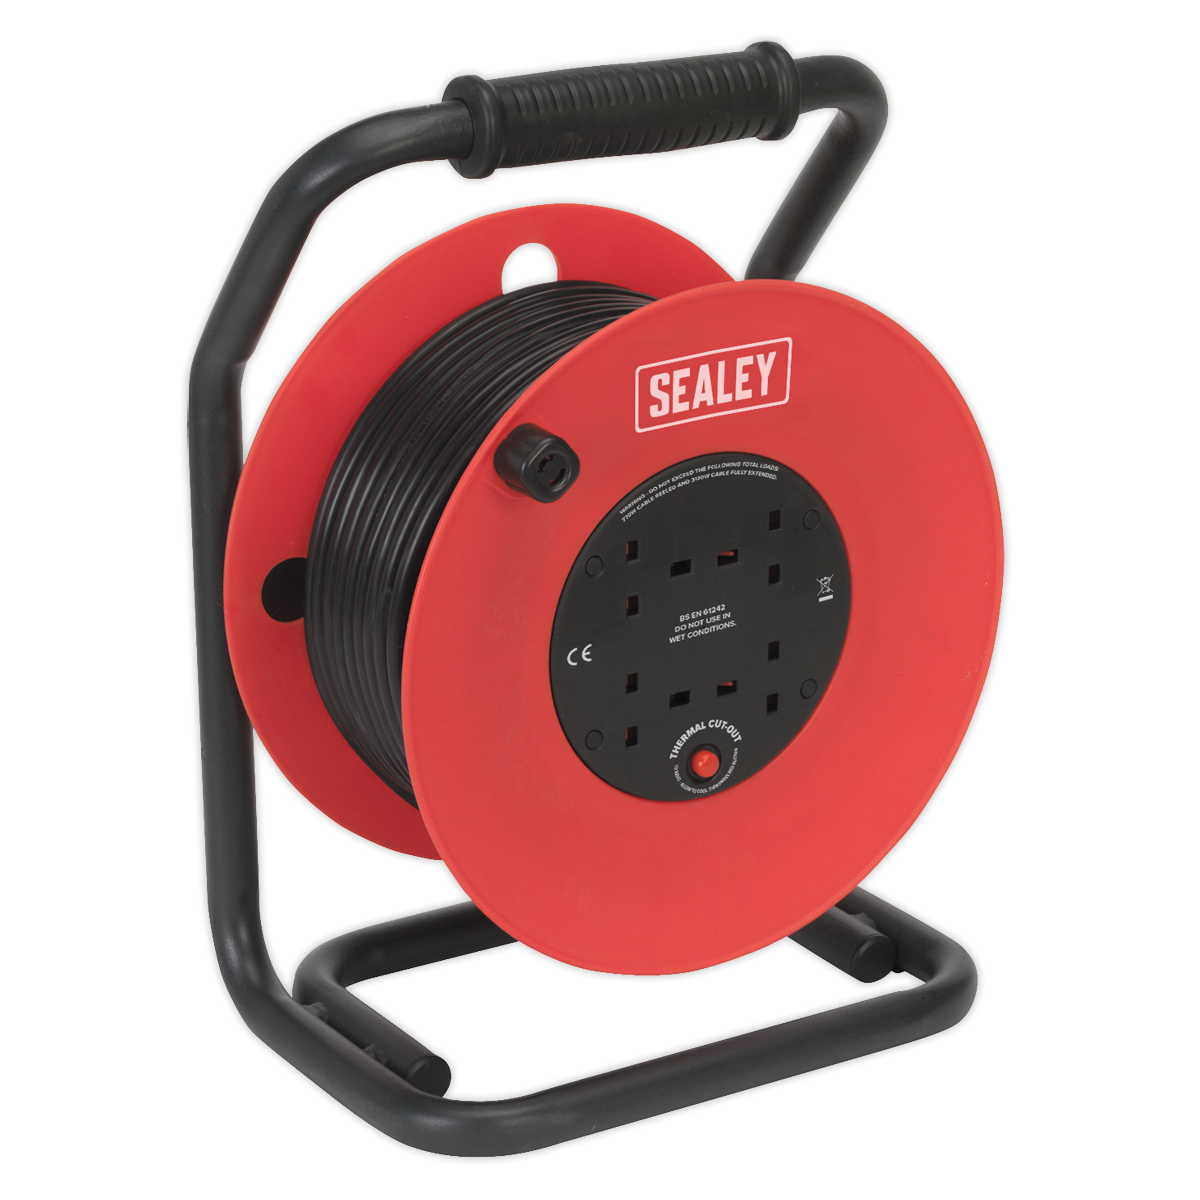 SEALEY Cable Reel 50m 4 x 230V 1.5mm² Heavy-Duty Thermal Trip